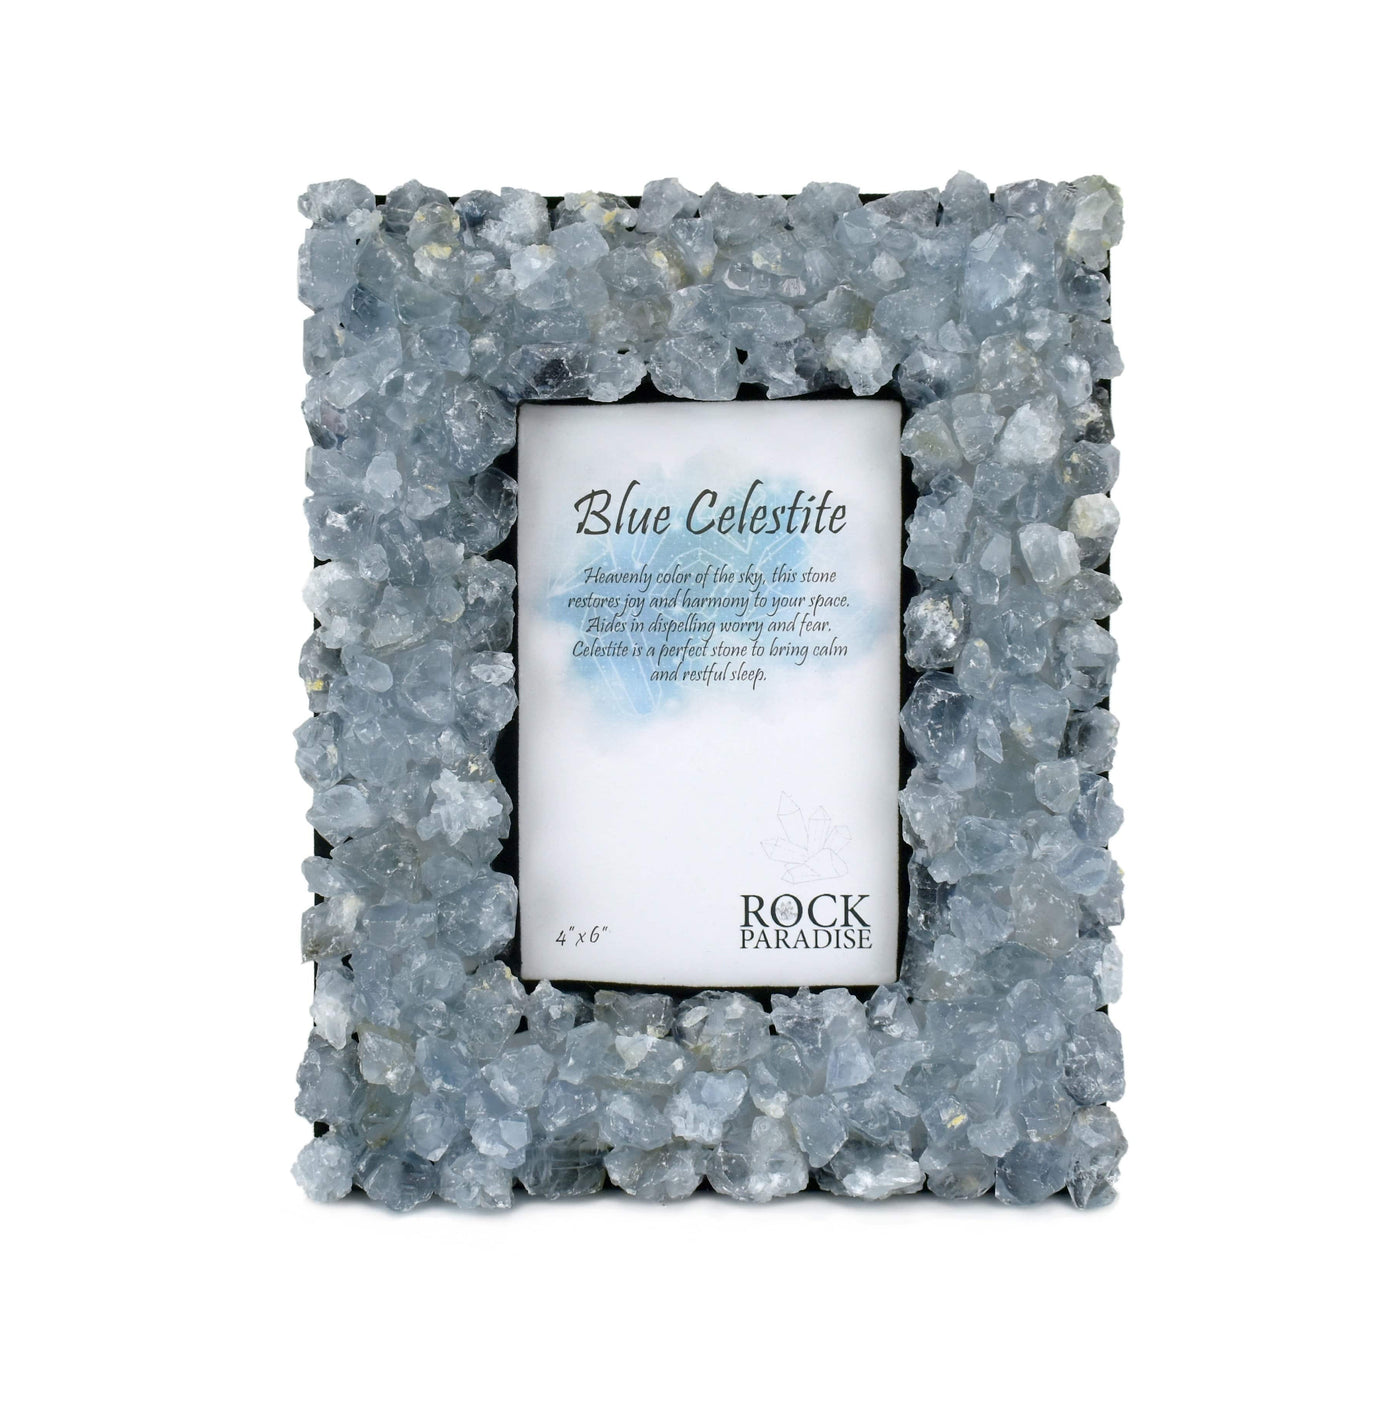 Stone Picture Frame - blue celestite on a table